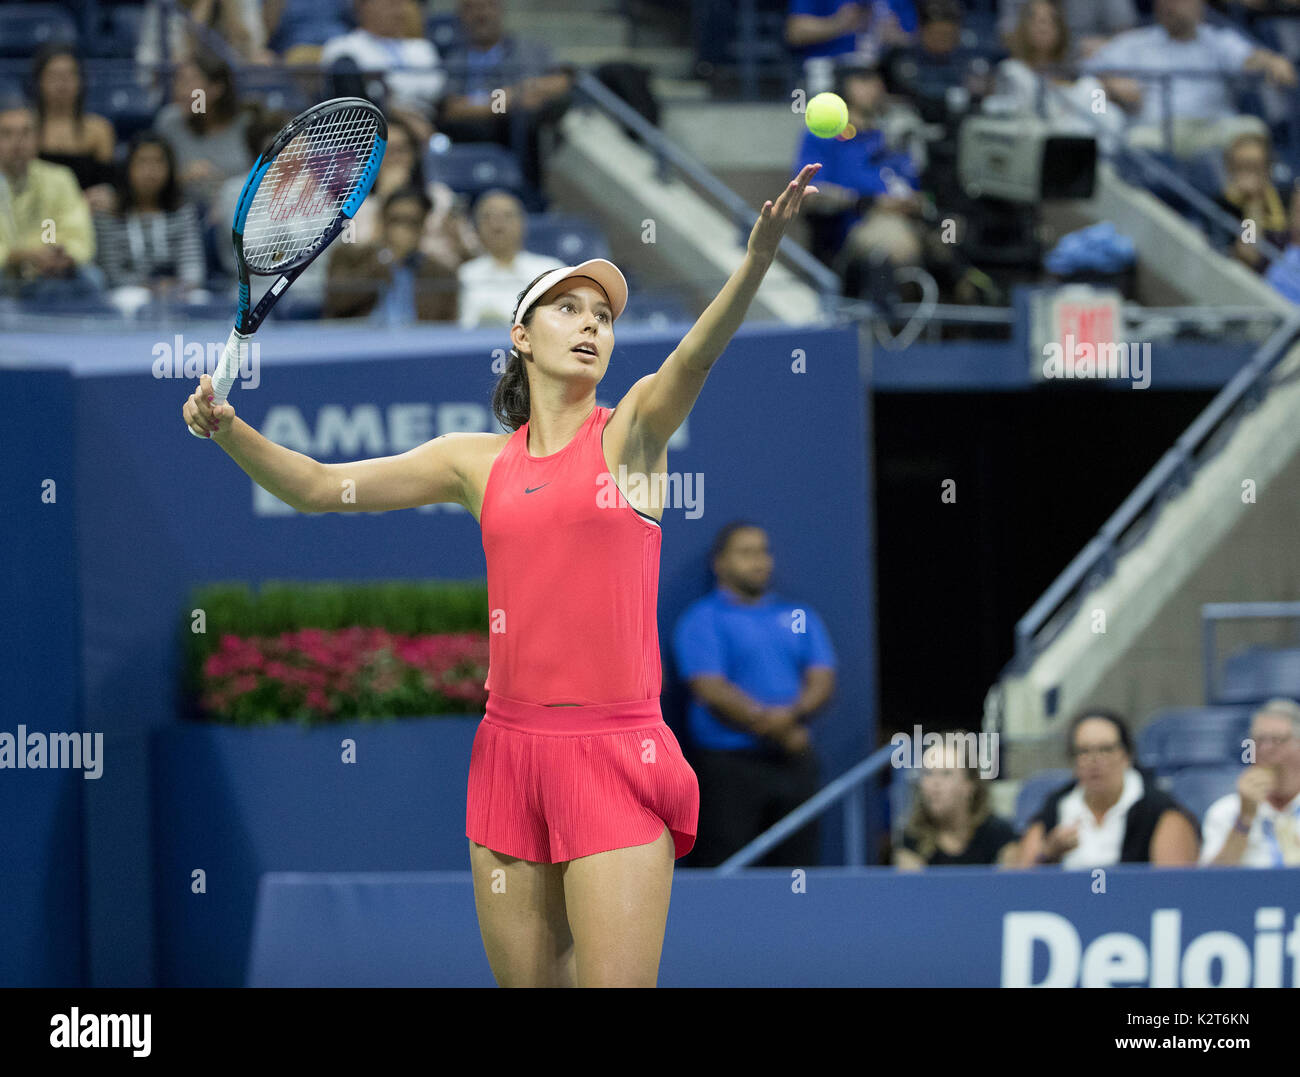 New York, United States. 30th Aug, 2017. Oceane Dodin of France serves during match against Venus Williams of USA at US Open Championships at Billie Jean King National Tennis Center Credit: Lev Radin/Pacific Press/Alamy Live News Stock Photo